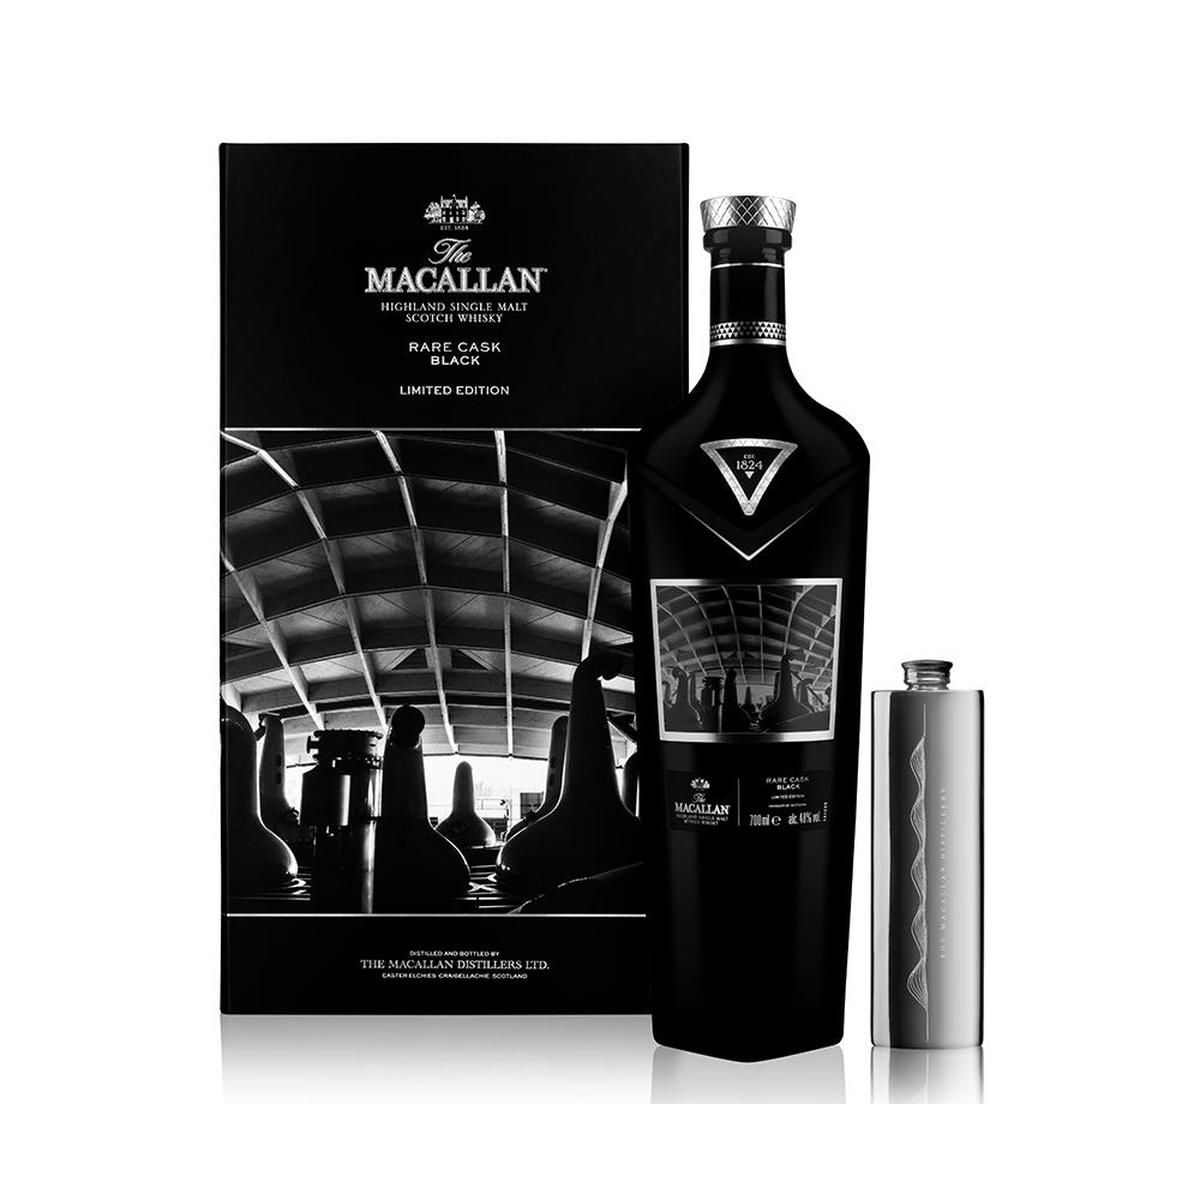 The Macallan Rare Cask Black Limited Edition 2018 700ml